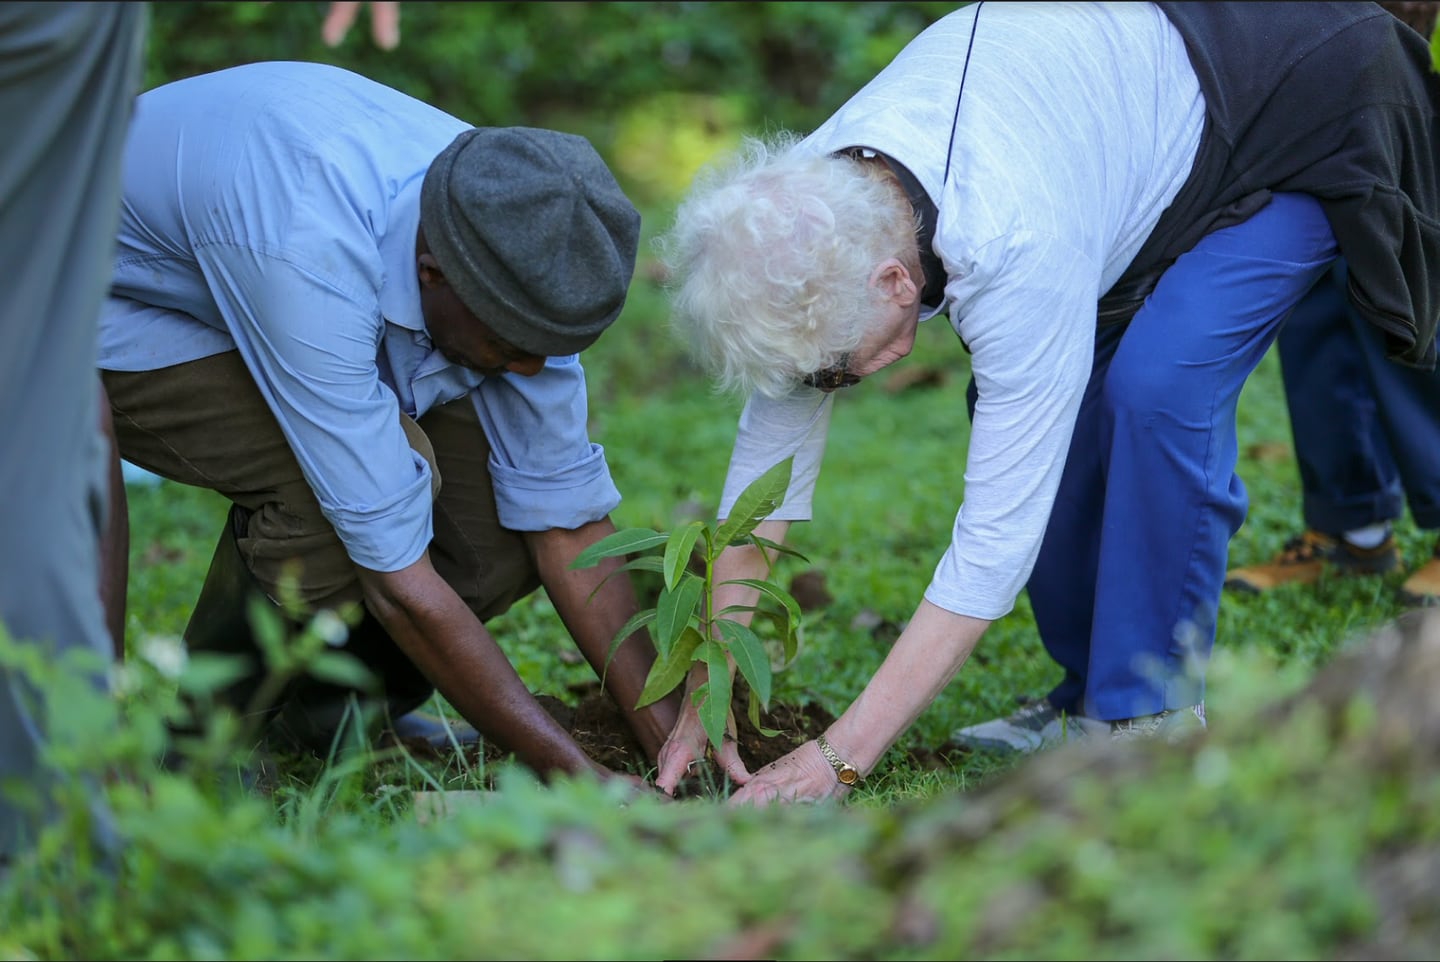 Kaanankira Mbise (left), a community member from Seela village in Tanzania, plants a tree with Barb Ross from Anchorage